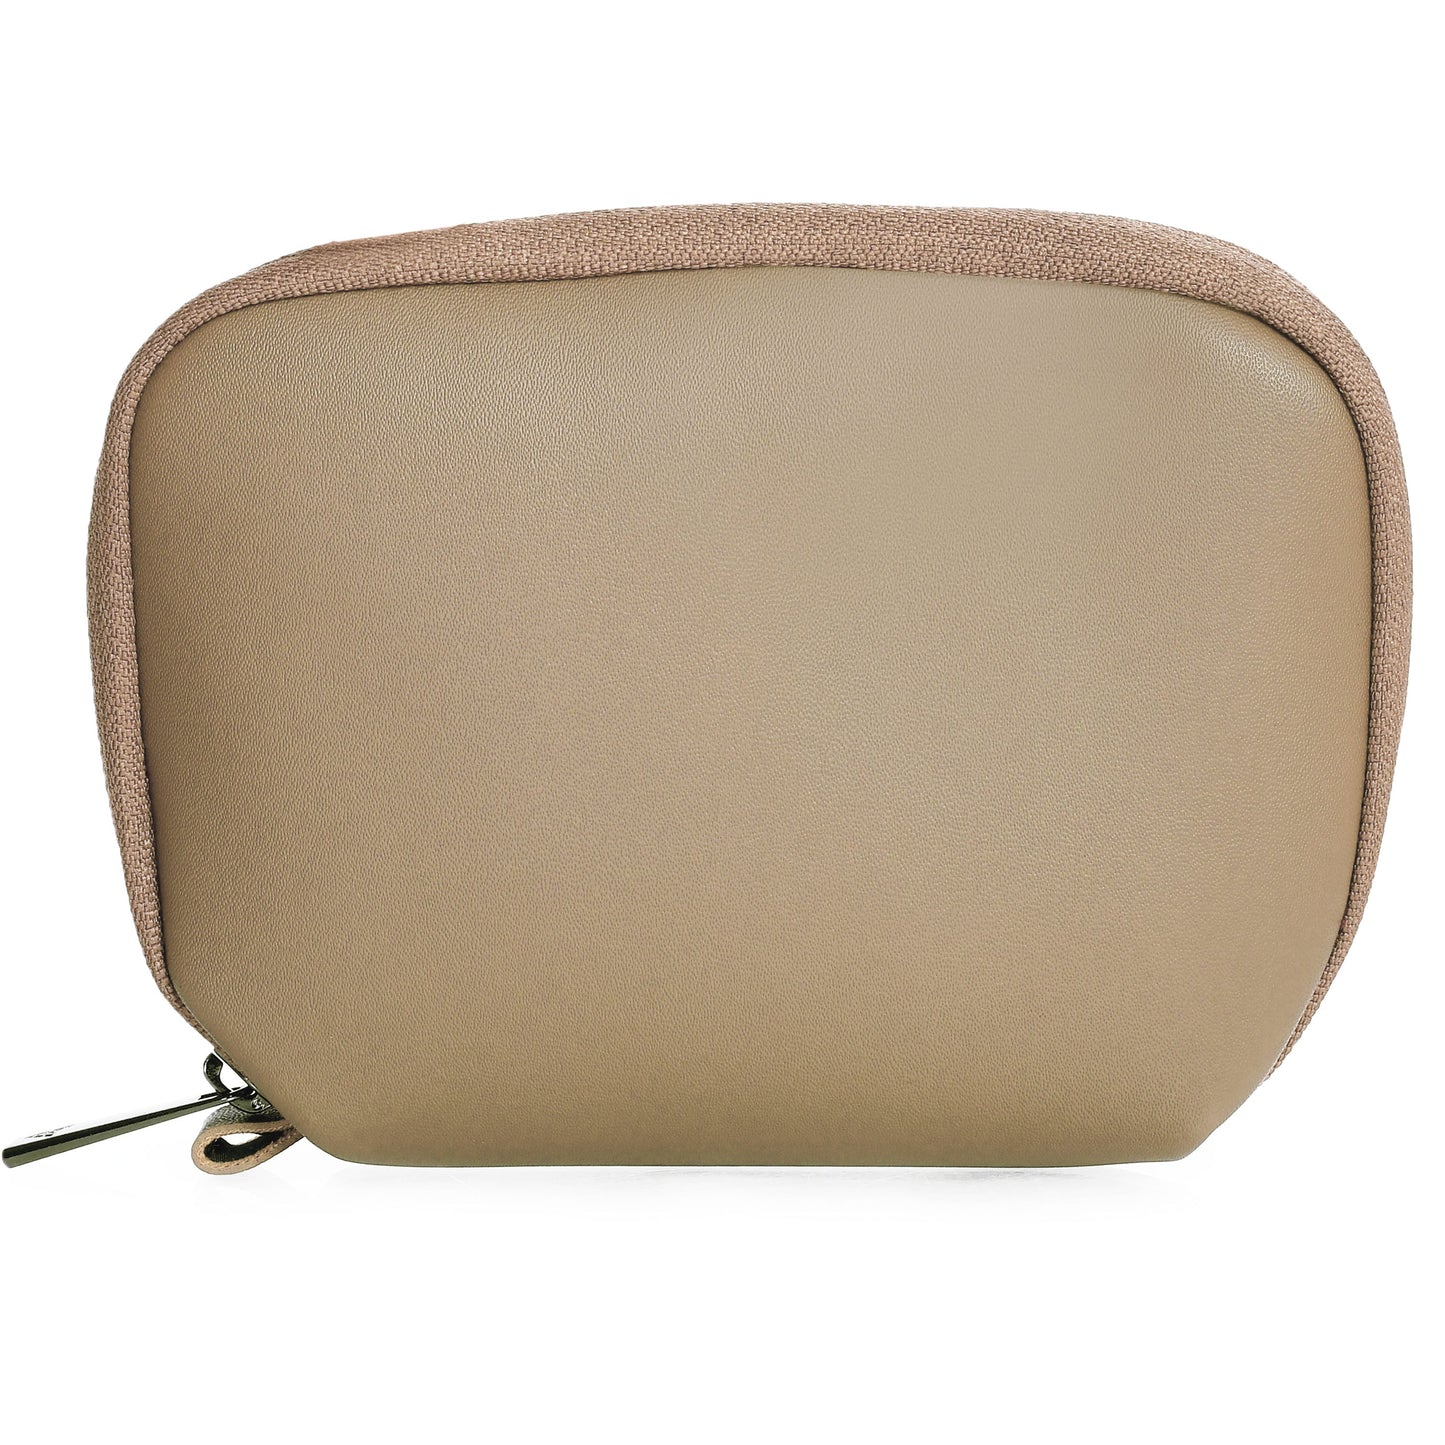 vaku-luxos®-da-italiano-refined-leather-sleeve-with-free-pouch-strap-highly-durable-compatilbe-for-macbook-14-khaki8905129024482